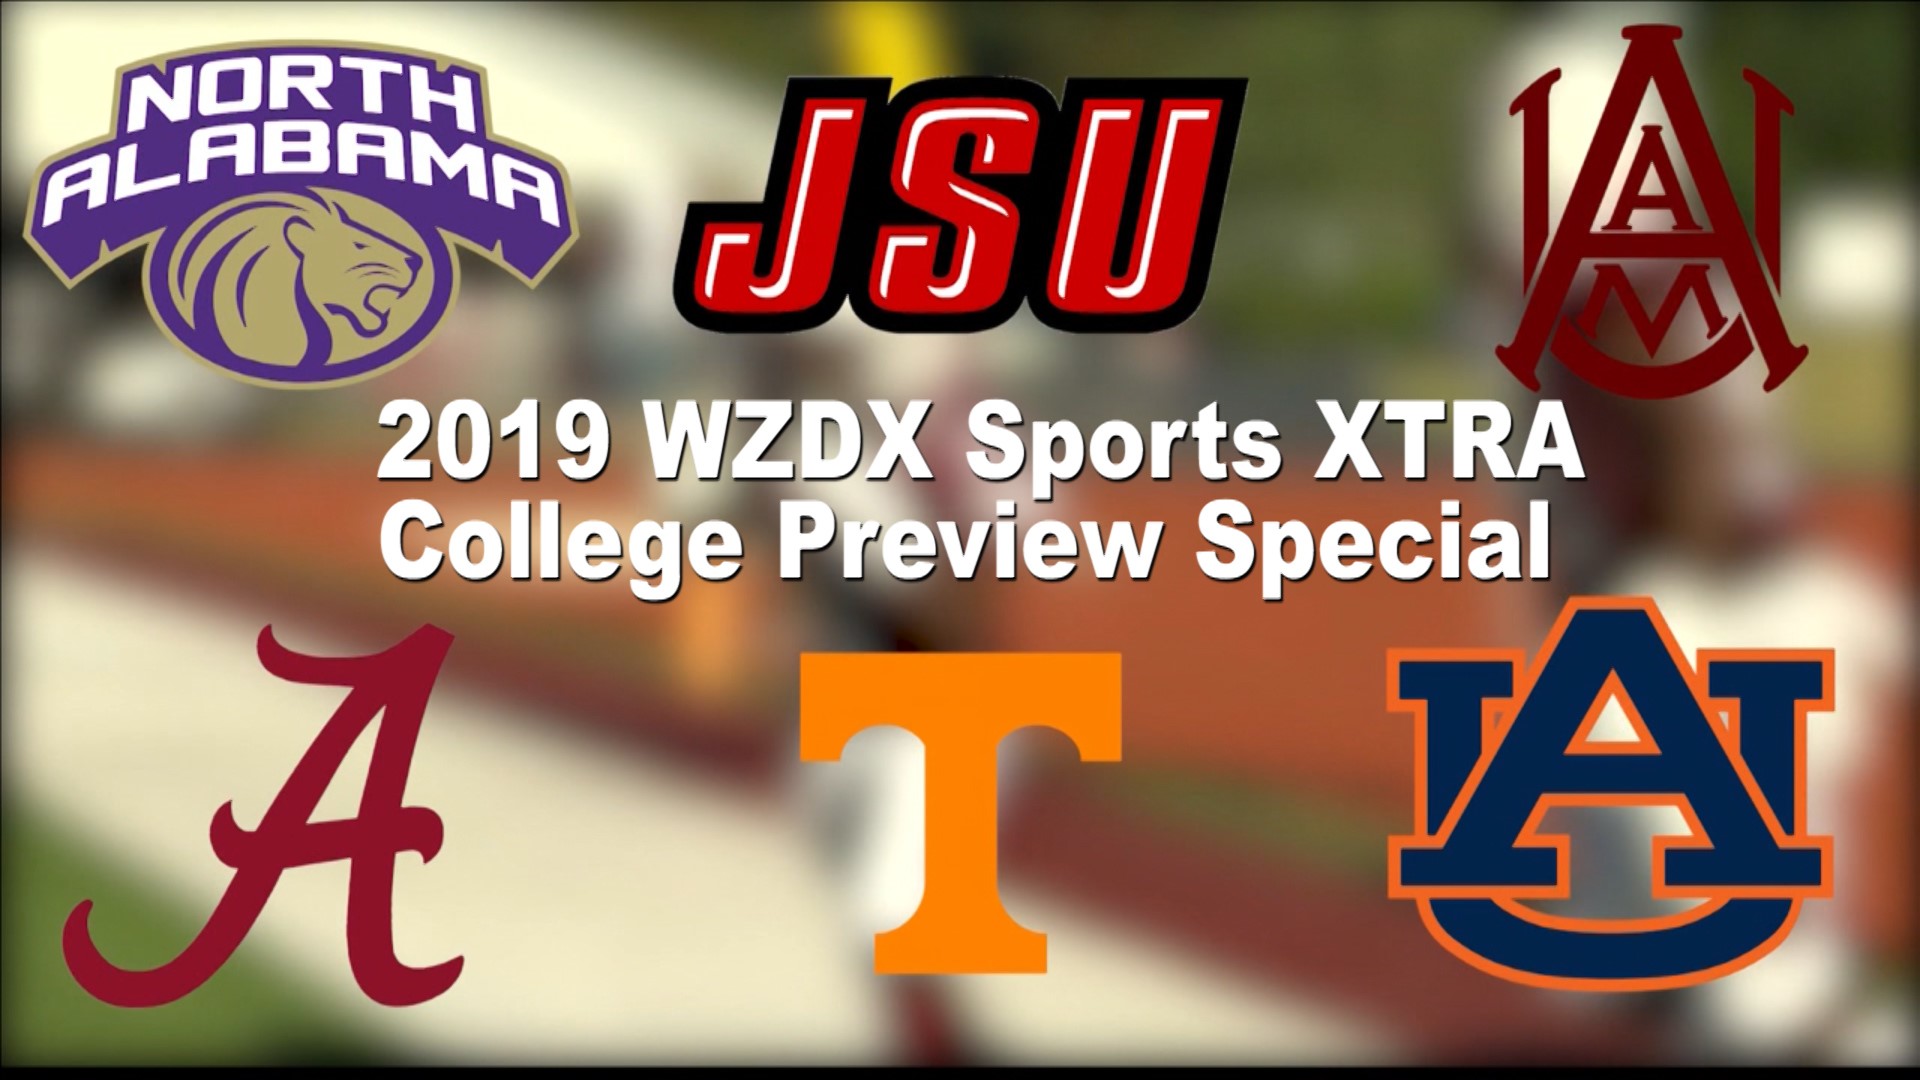 Another college football season is right around the corner and the WZDX Sports Team is getting the Tennessee Valley ready for the upcoming season with their annual College Football Preview Special.